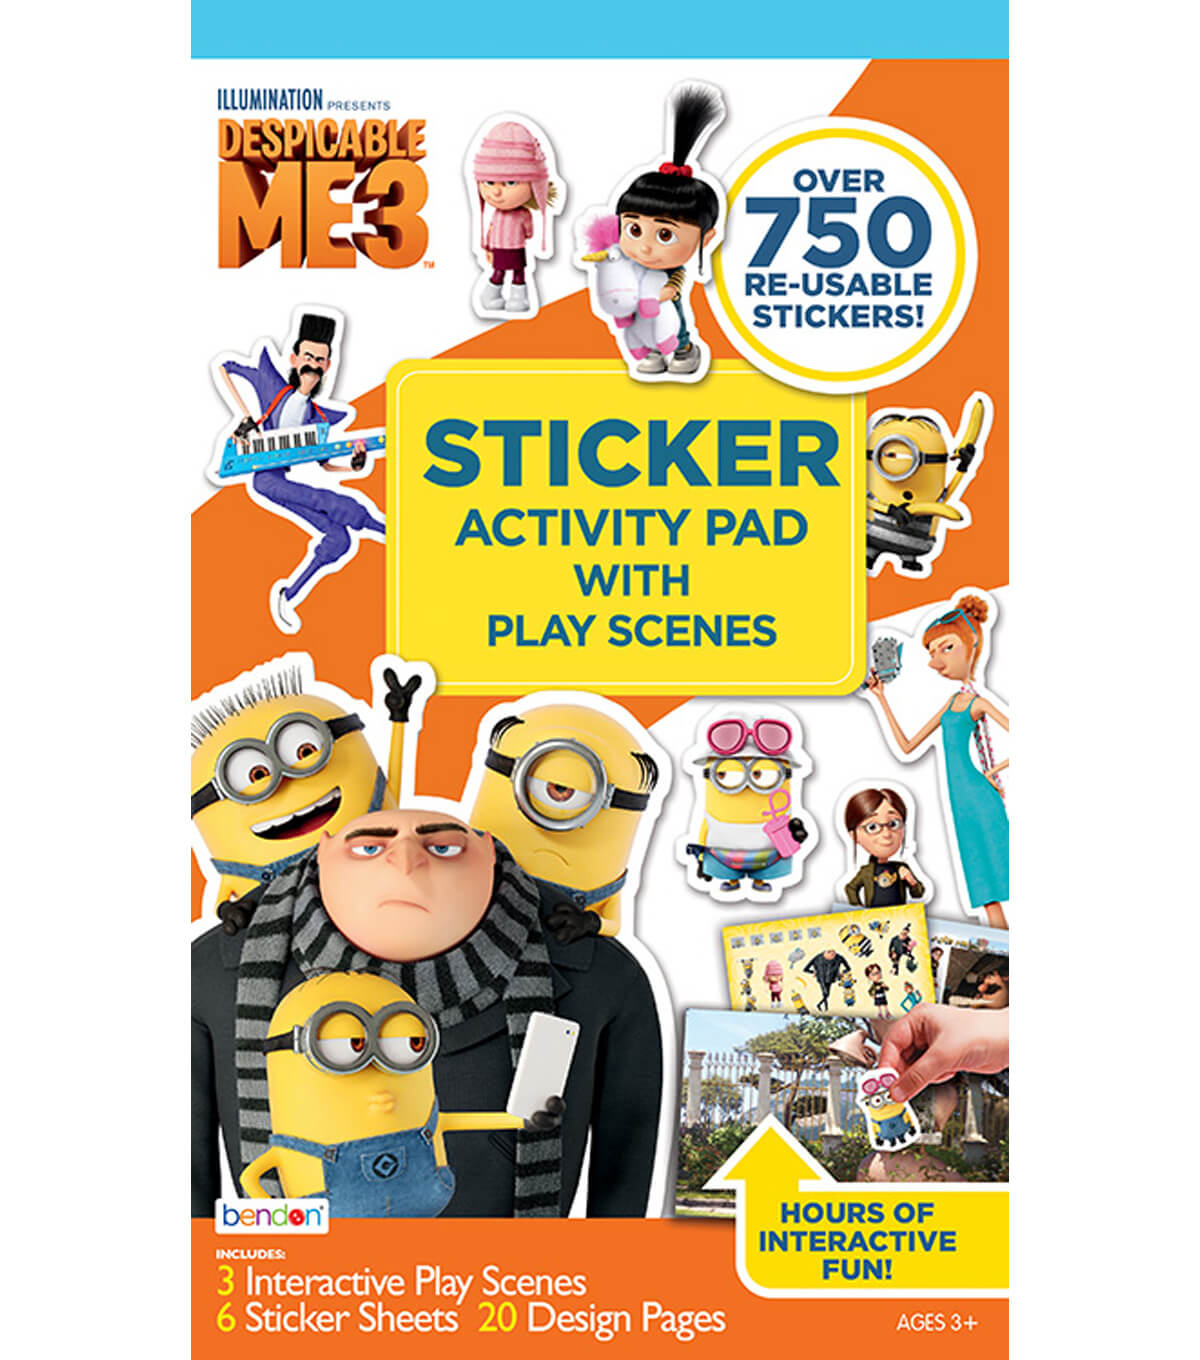 Despicable Me 3 Stickers by Universal Studios Interactive